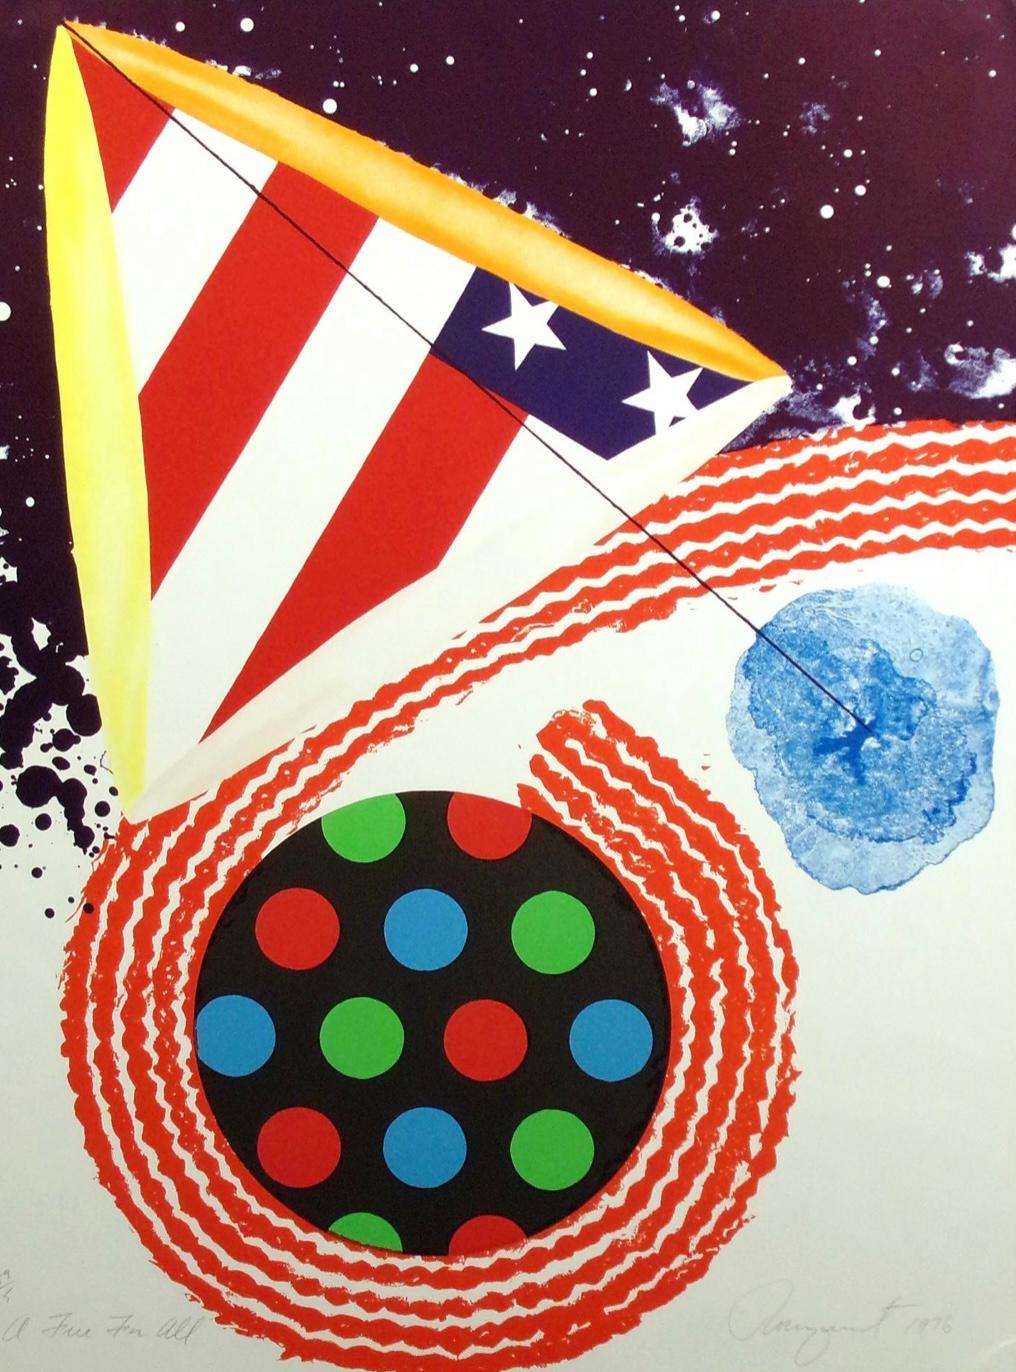 James Rosenquist Abstract Print - A Free For All (from "An American Portrait, 1776 - 1976")